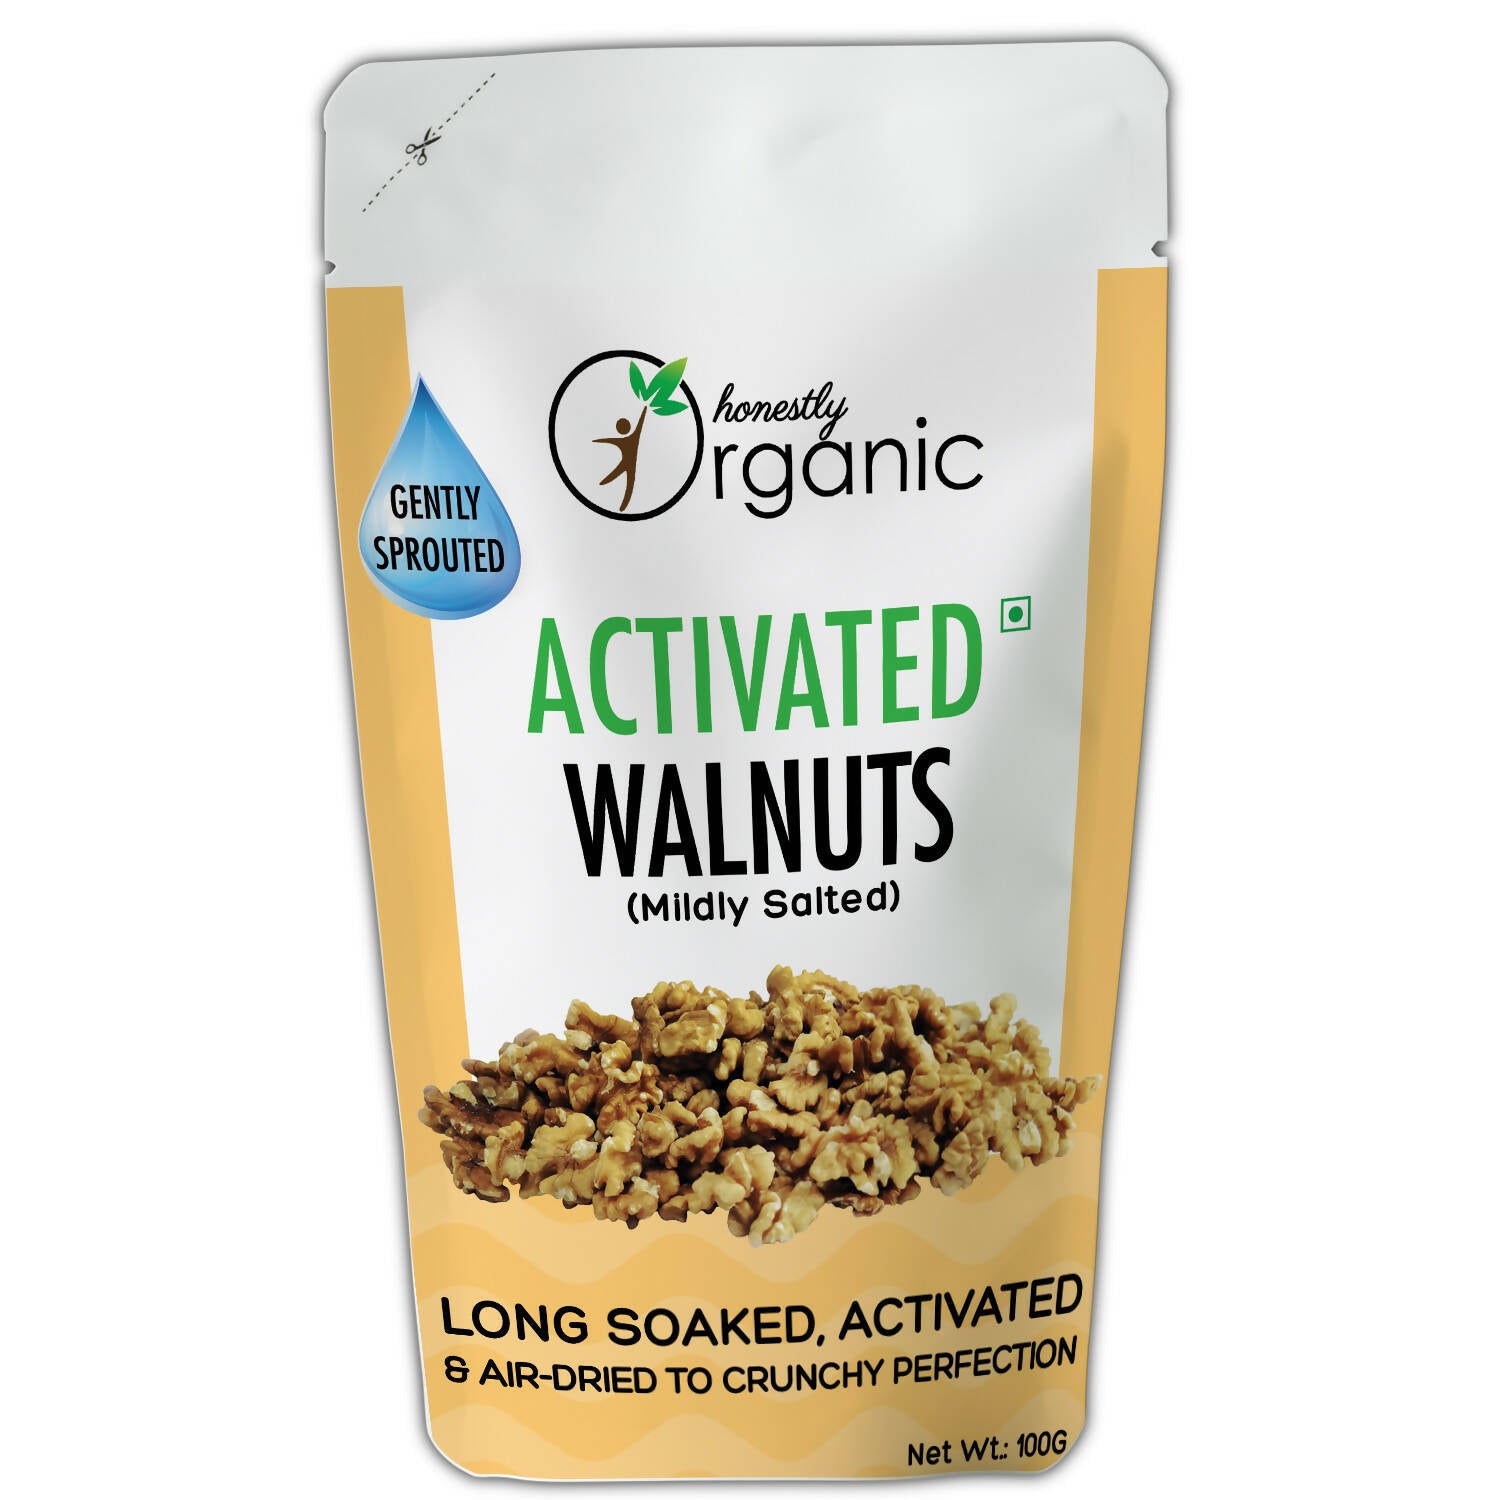 "Activated/Sprouted Walnuts - Mildly Salted (100% Natural, Long Soaked & Air Dried to Crunchy Perfection) - 100g "